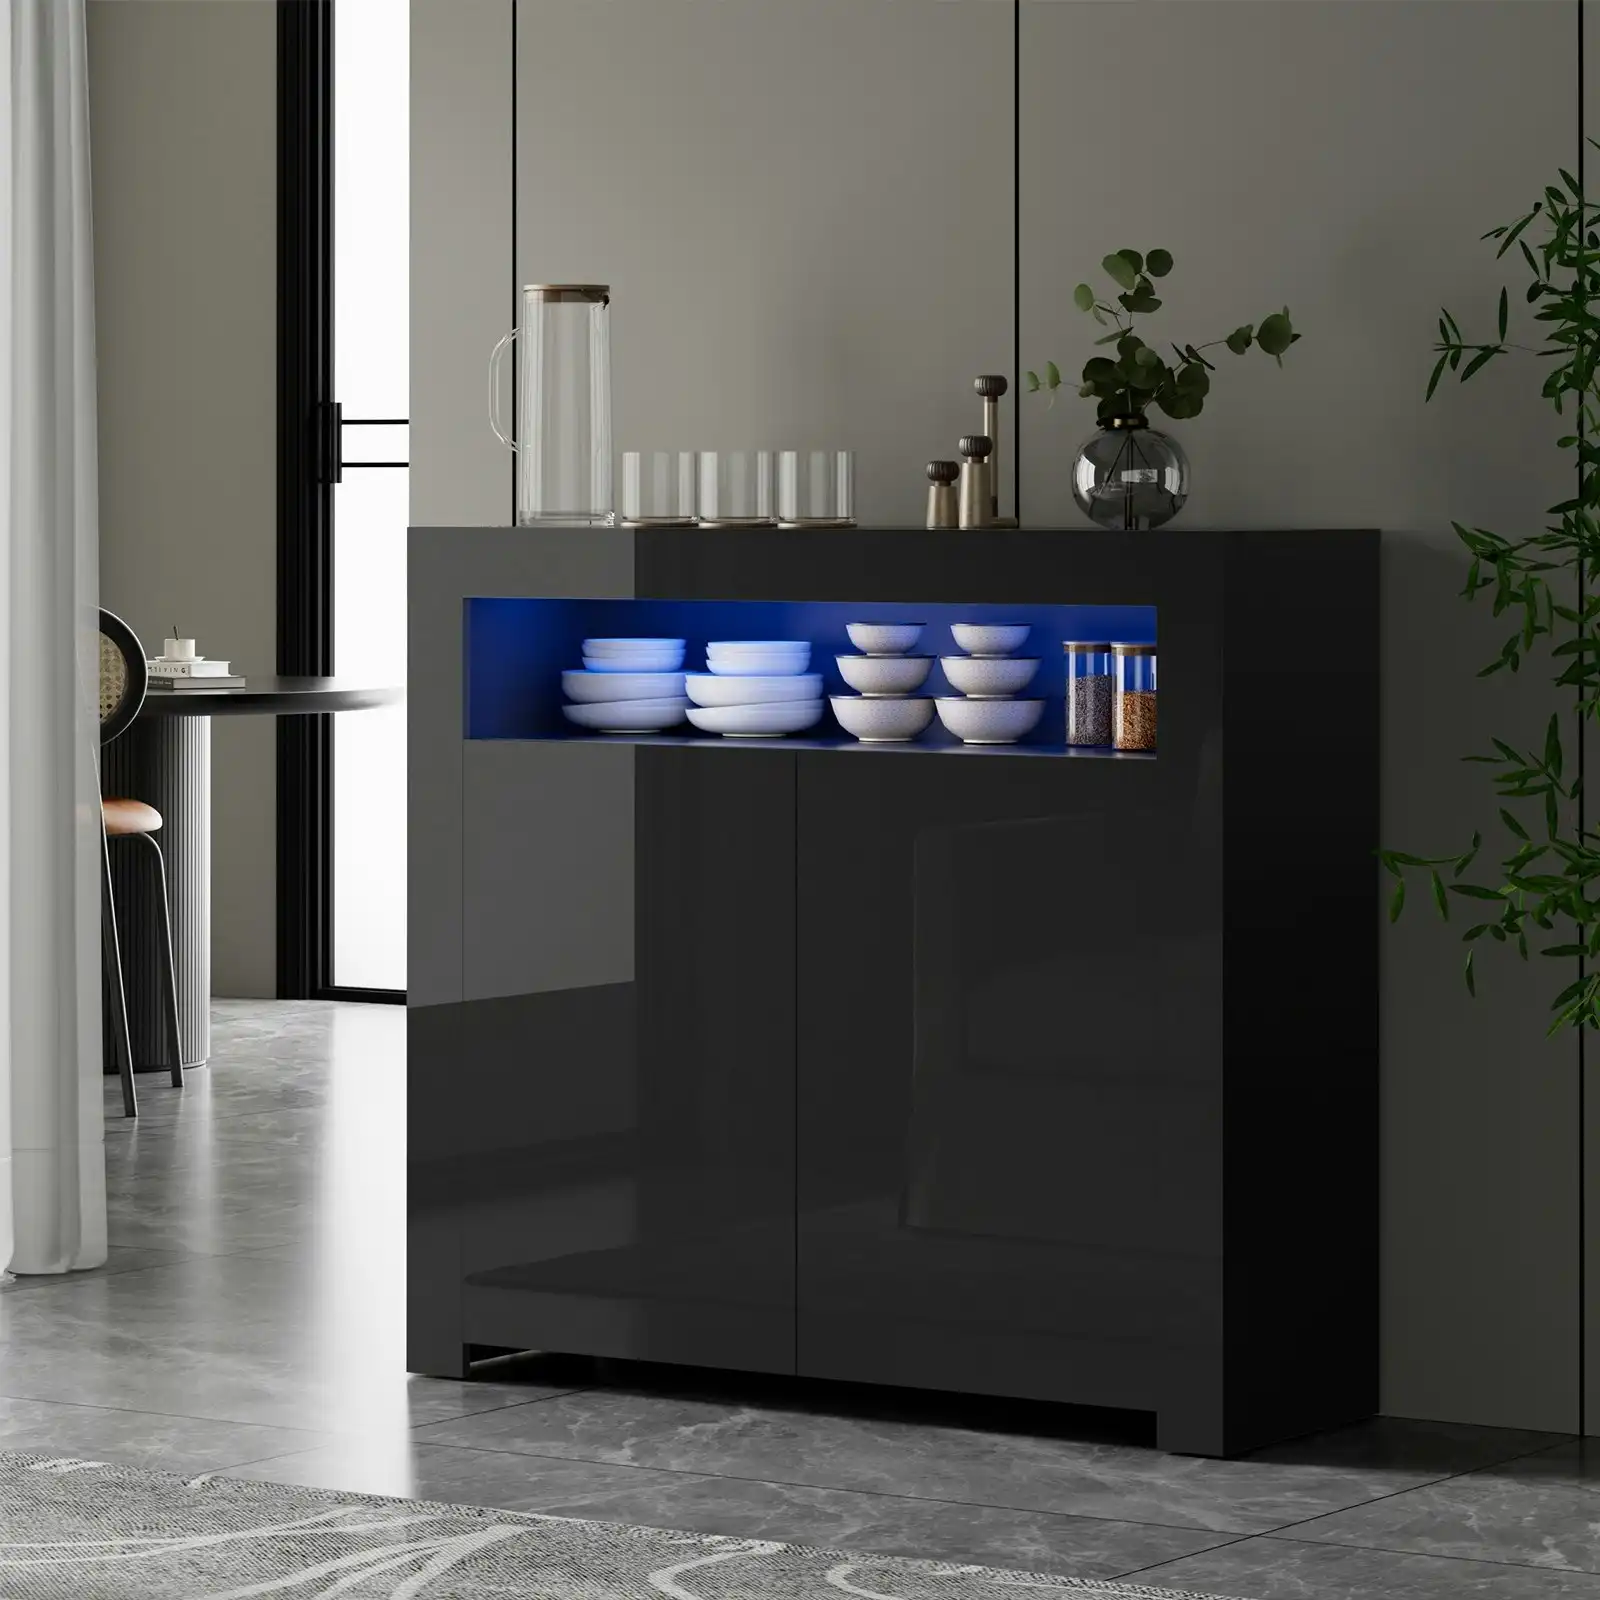 Oikiture Buffet Sideboard Storage Cabinet LED RGB High Gloss 2 Doors Black